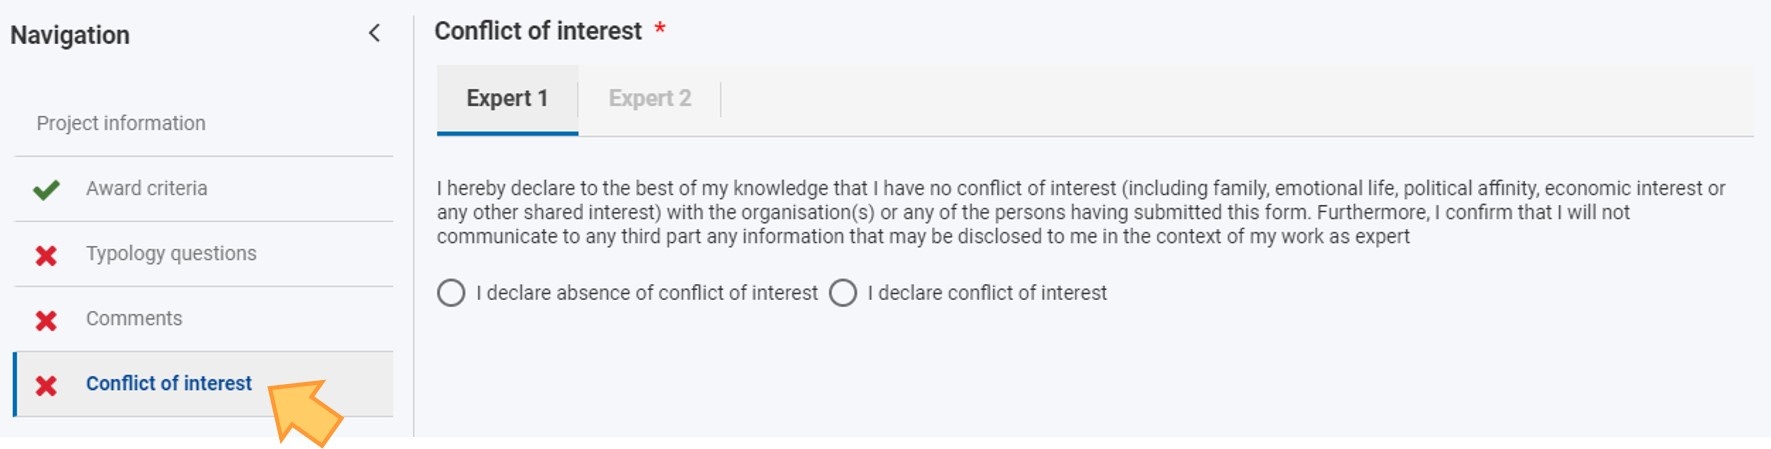 Conflict of interest section of an assessment